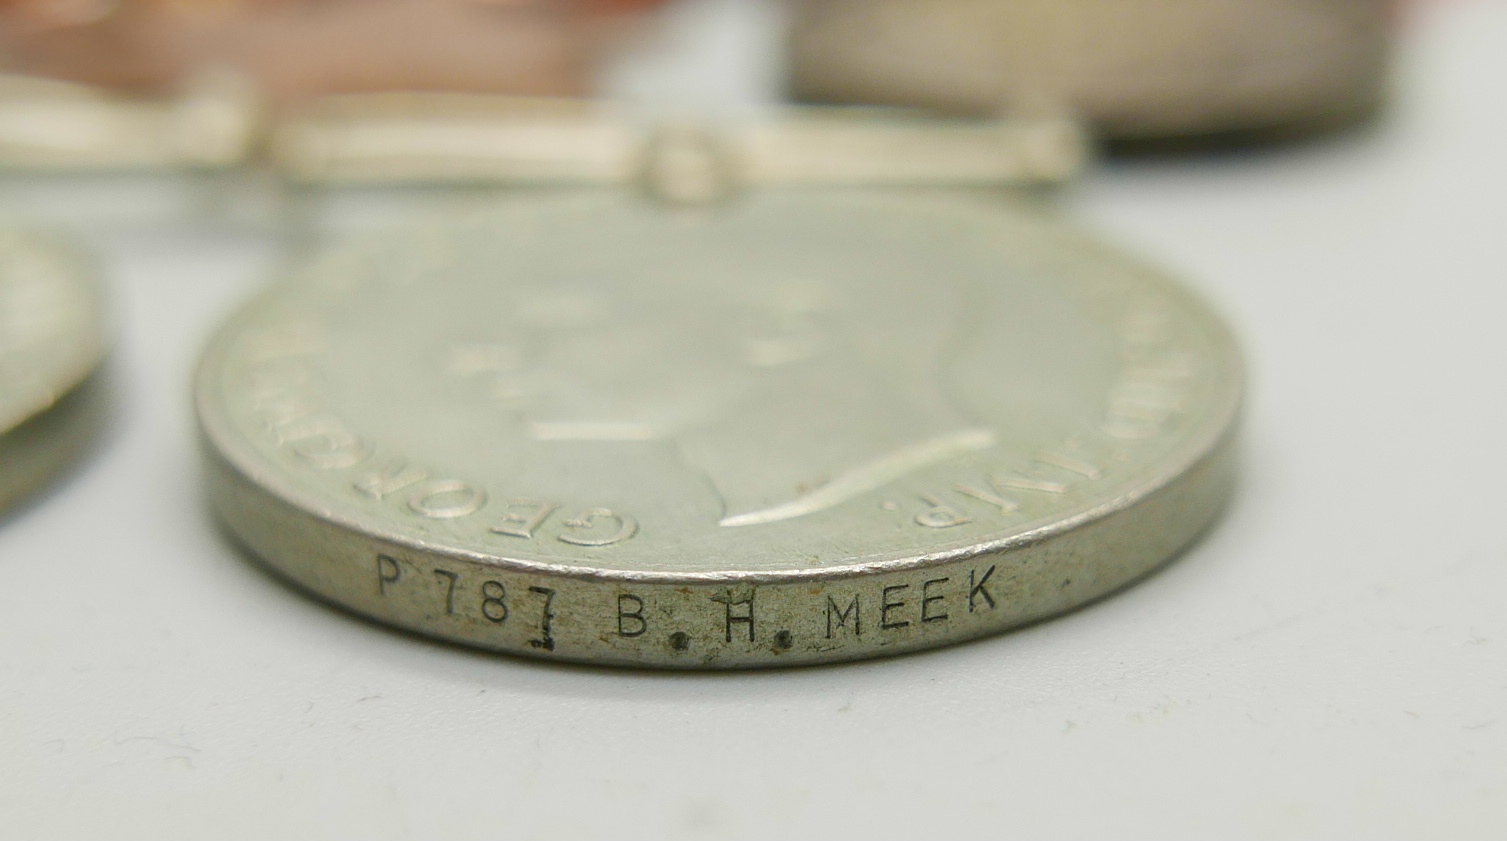 A set of six WWII medals to P787 B.H. Meek - Image 5 of 5